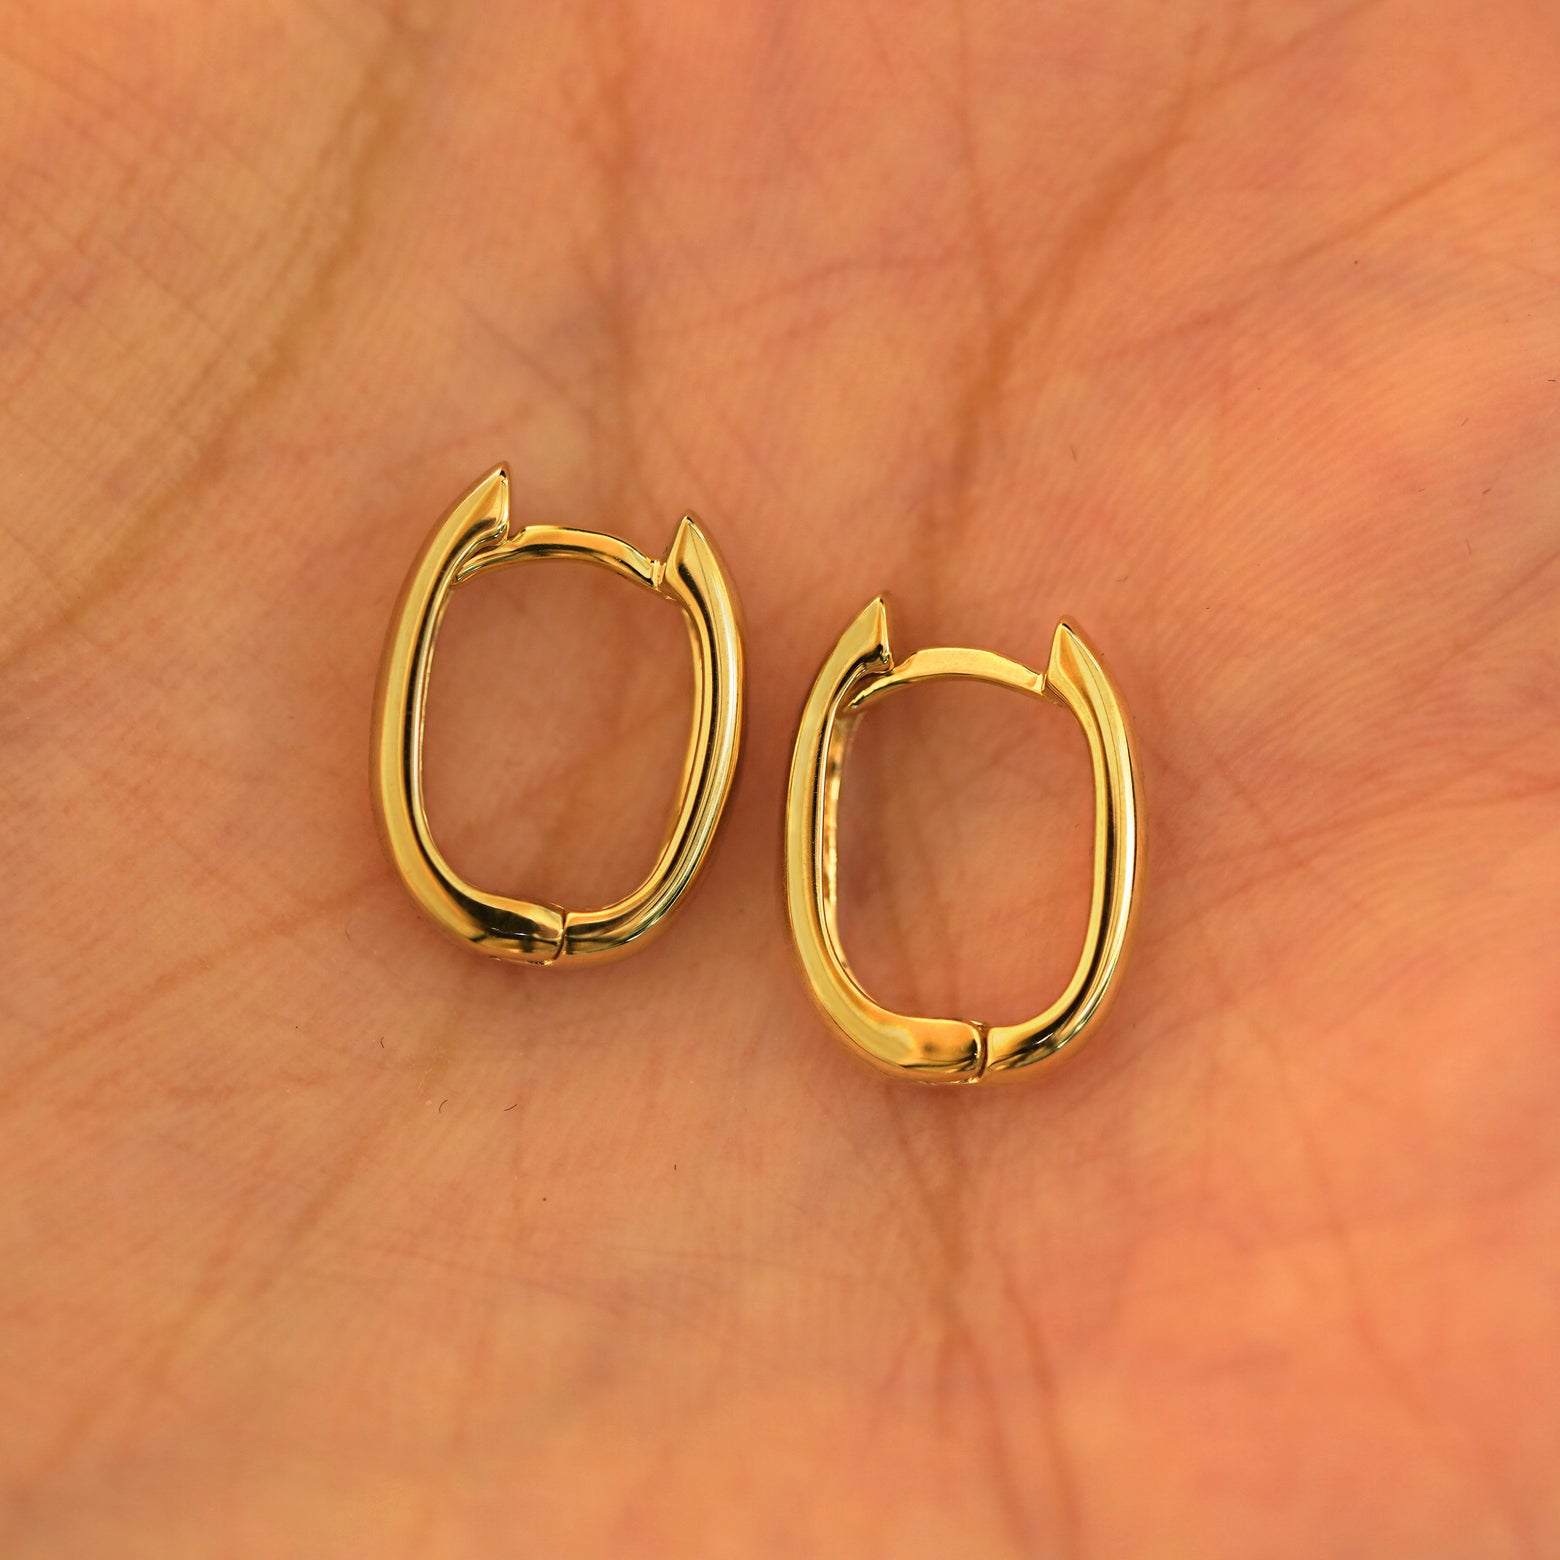 A pair of 14k yellow gold Thick Oval Huggie Hoops resting in a model's palm